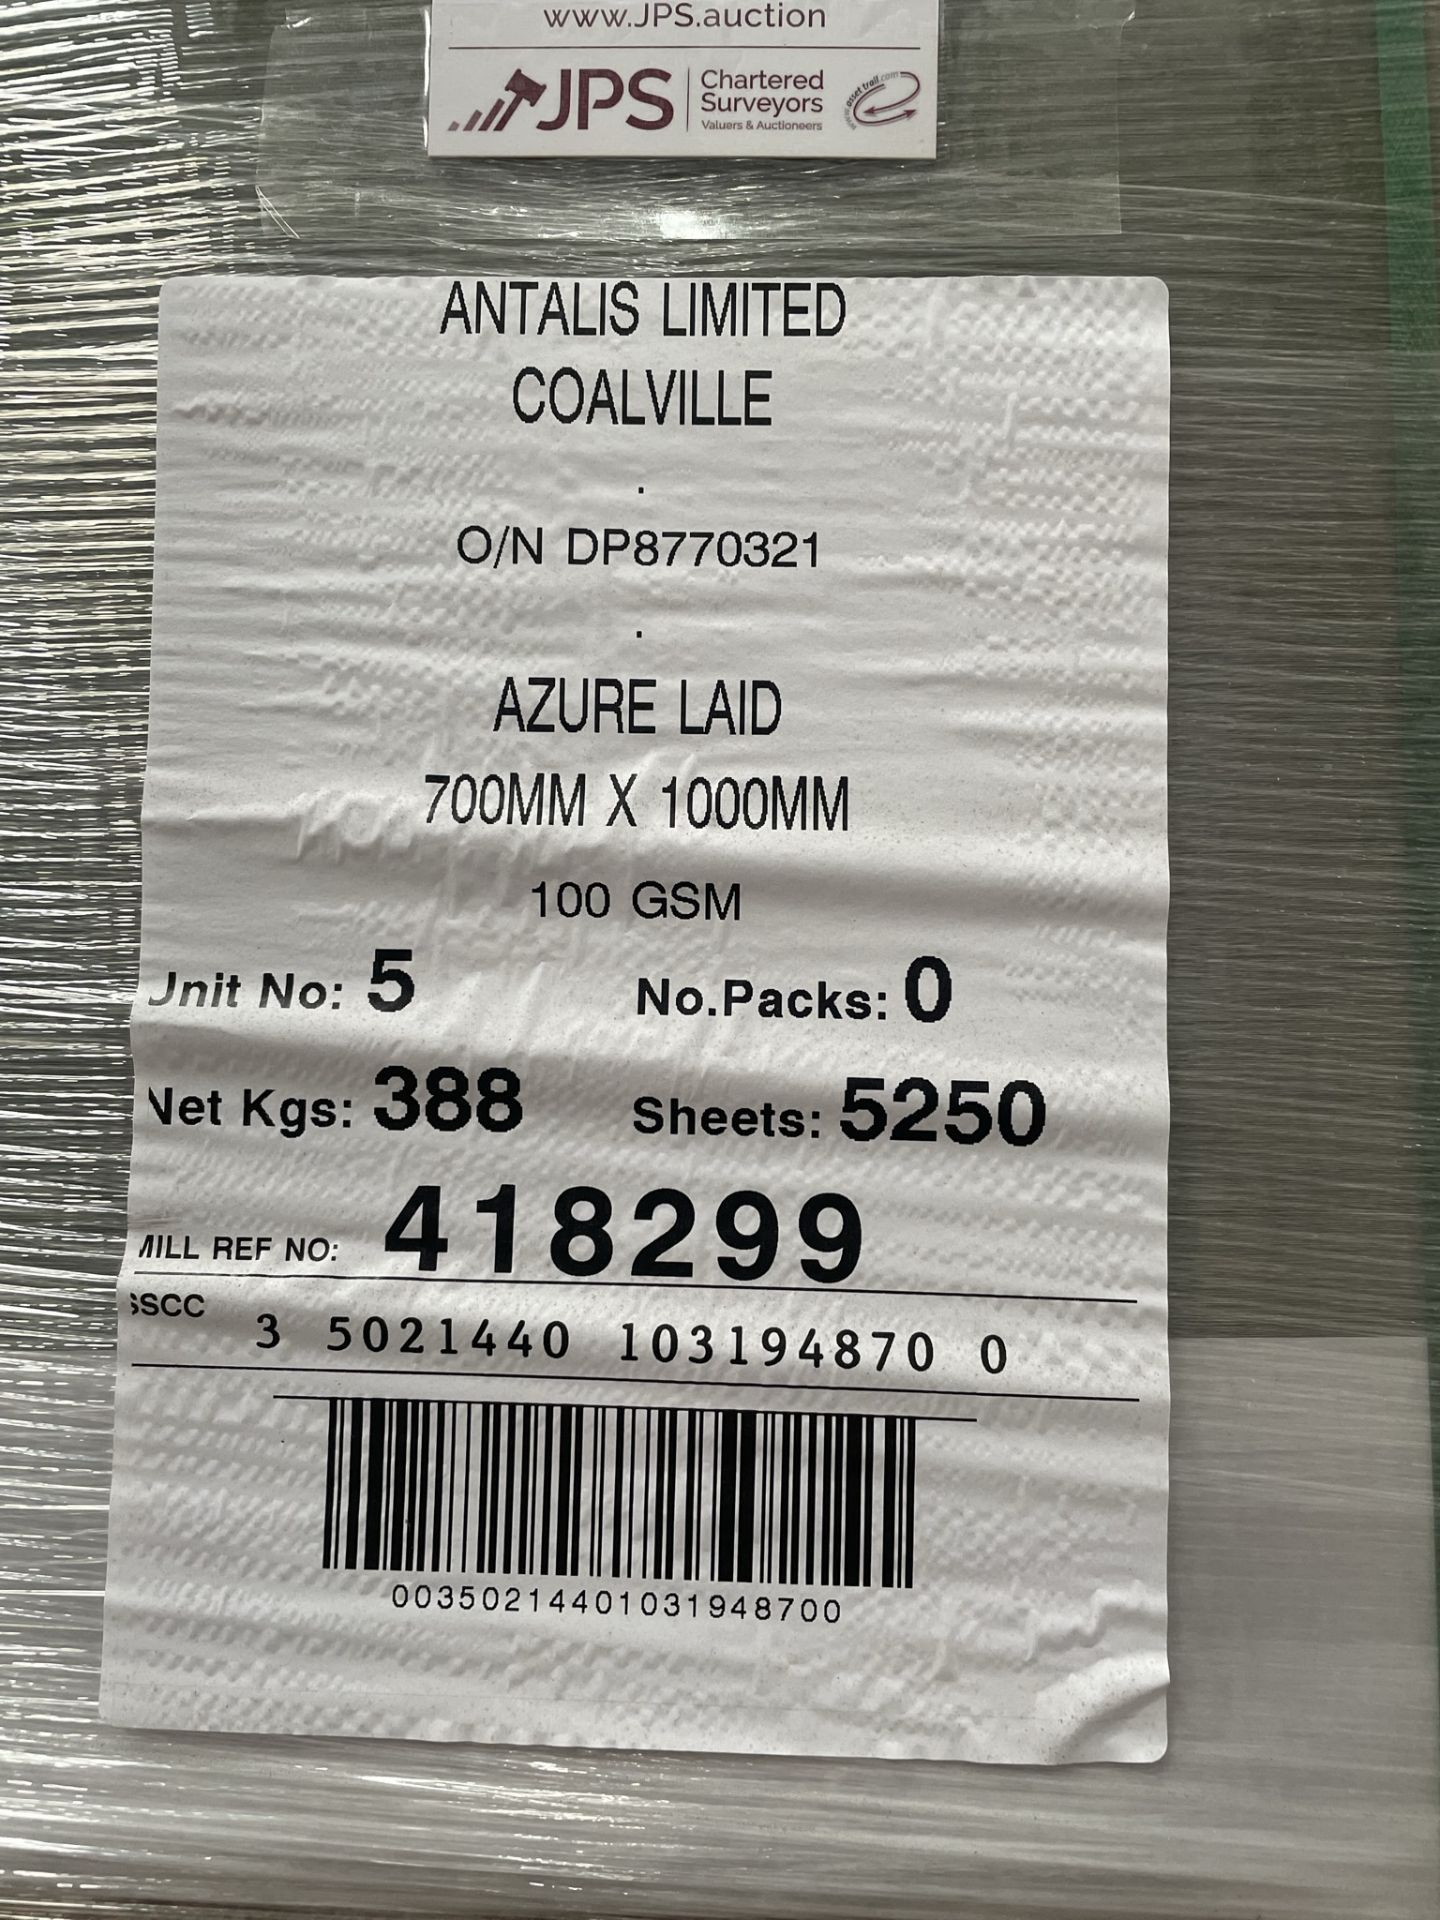 3 x Pallets of Azure Laid 100GSM Paper | 70 x 100cm | Approx 14,500 in Total - Image 4 of 4